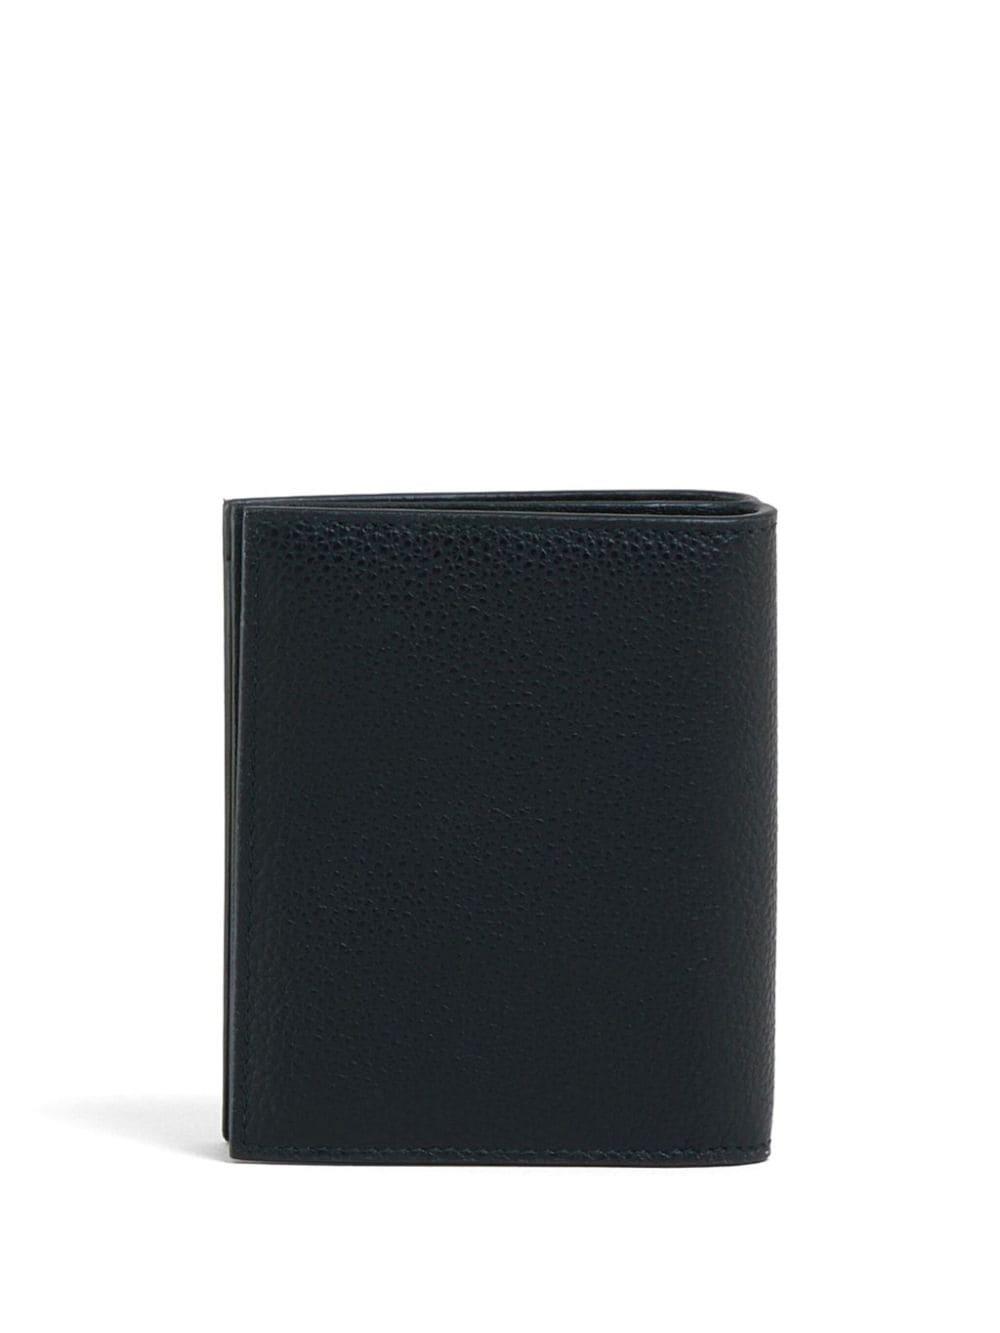 Marni logo-embroidered leather wallet - Black